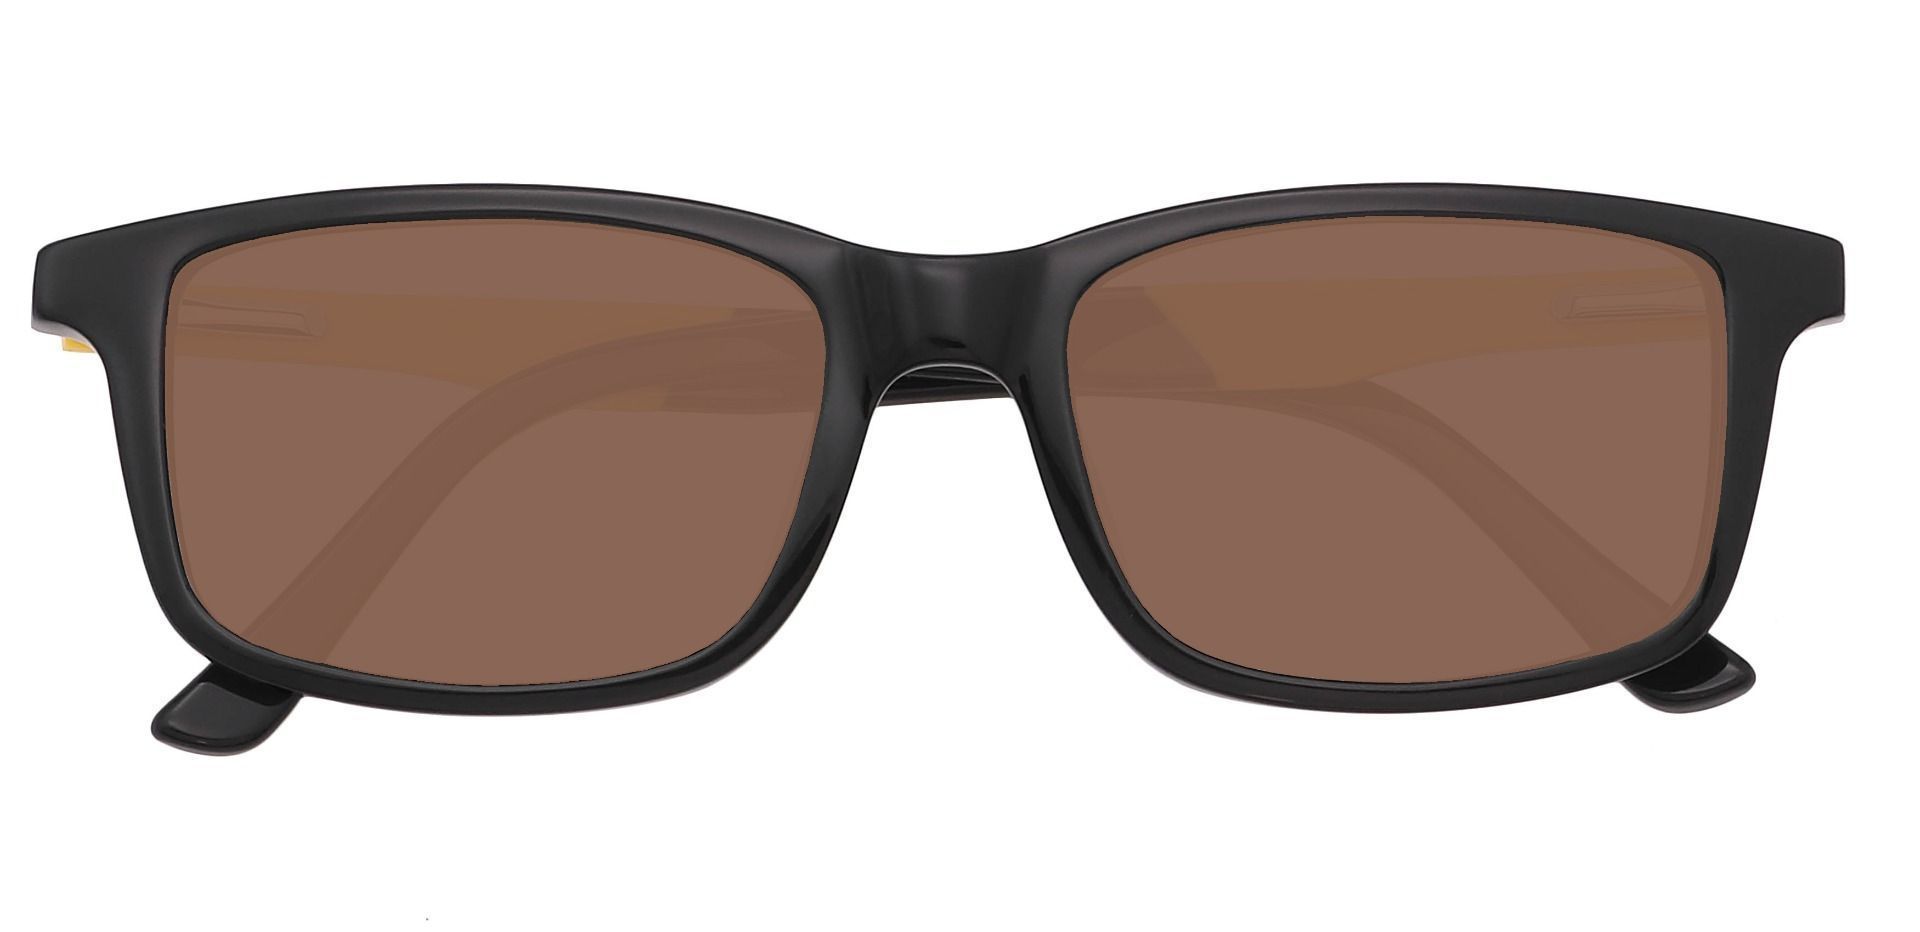 Rivers Rectangle Single Vision Sunglasses - Black Frame With Brown Lenses